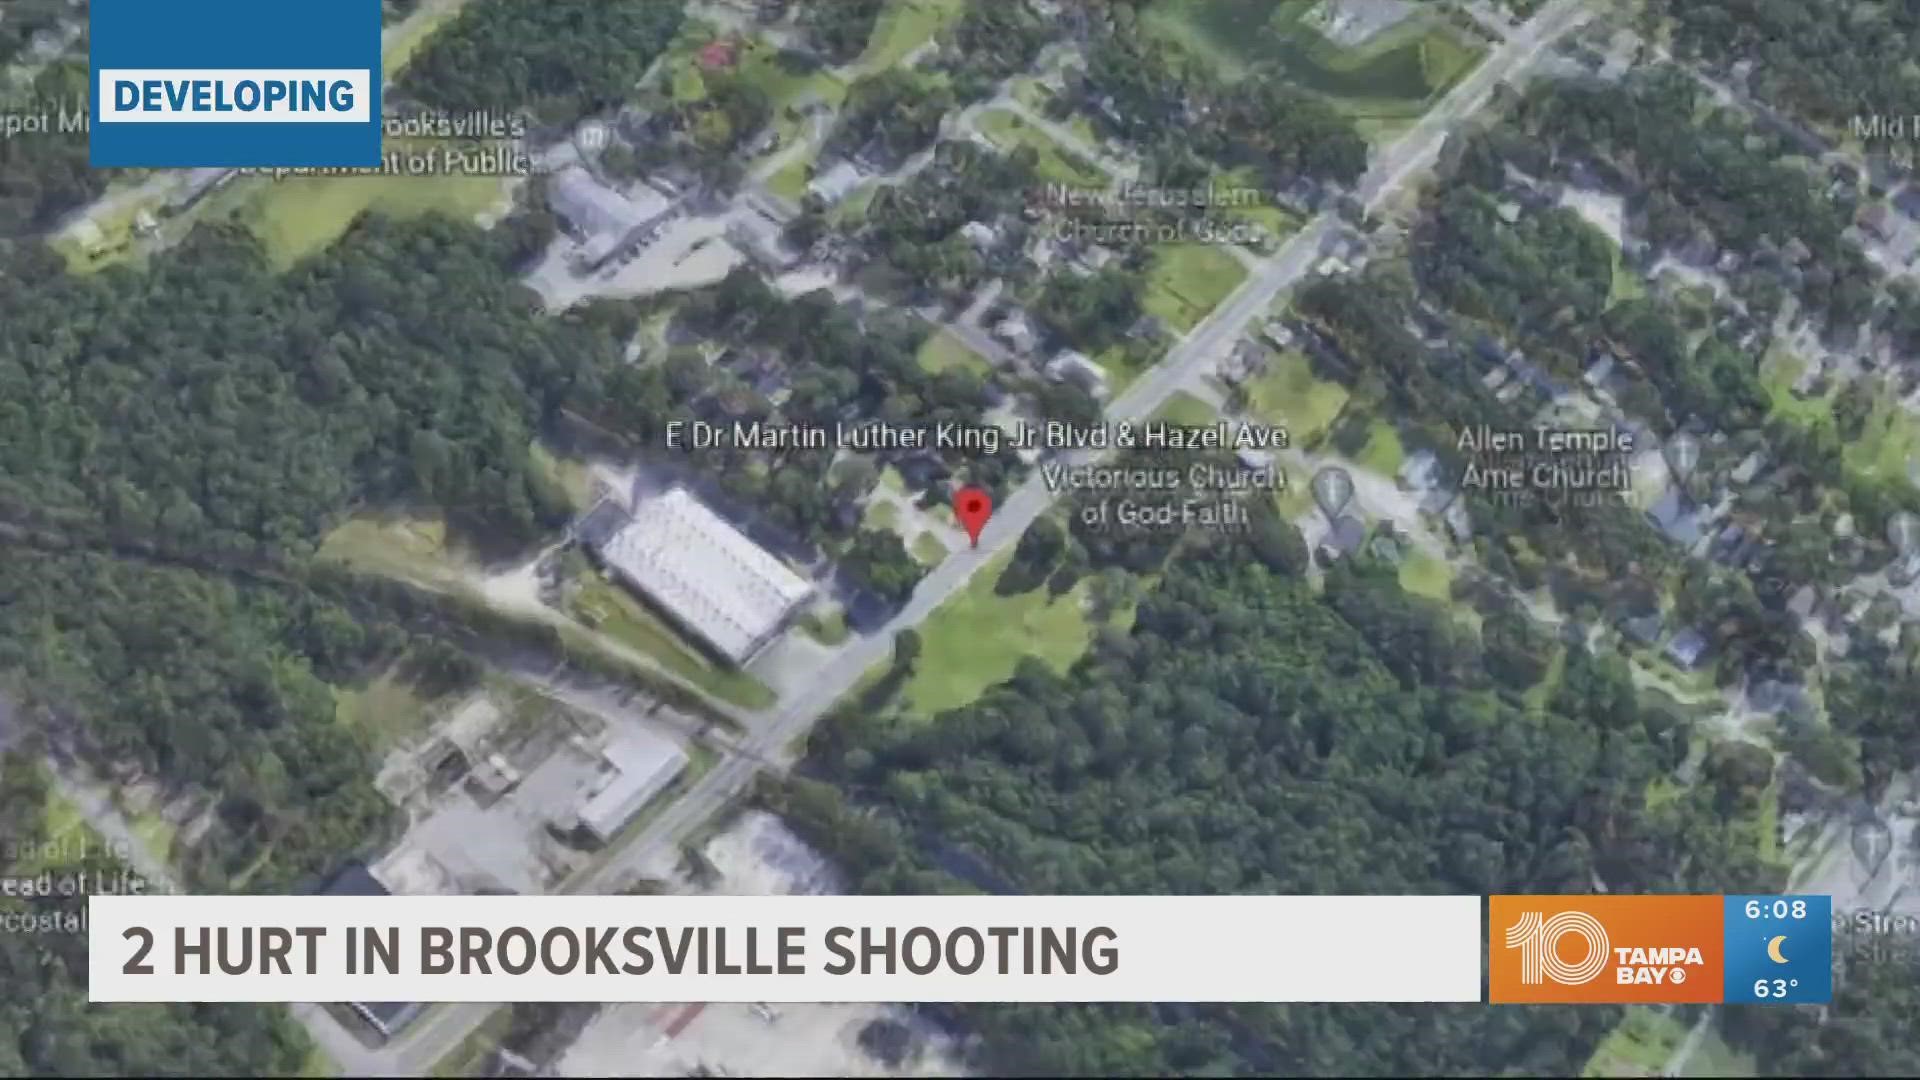 The unknown shooter was nowhere to be found, according to the sheriff's office.